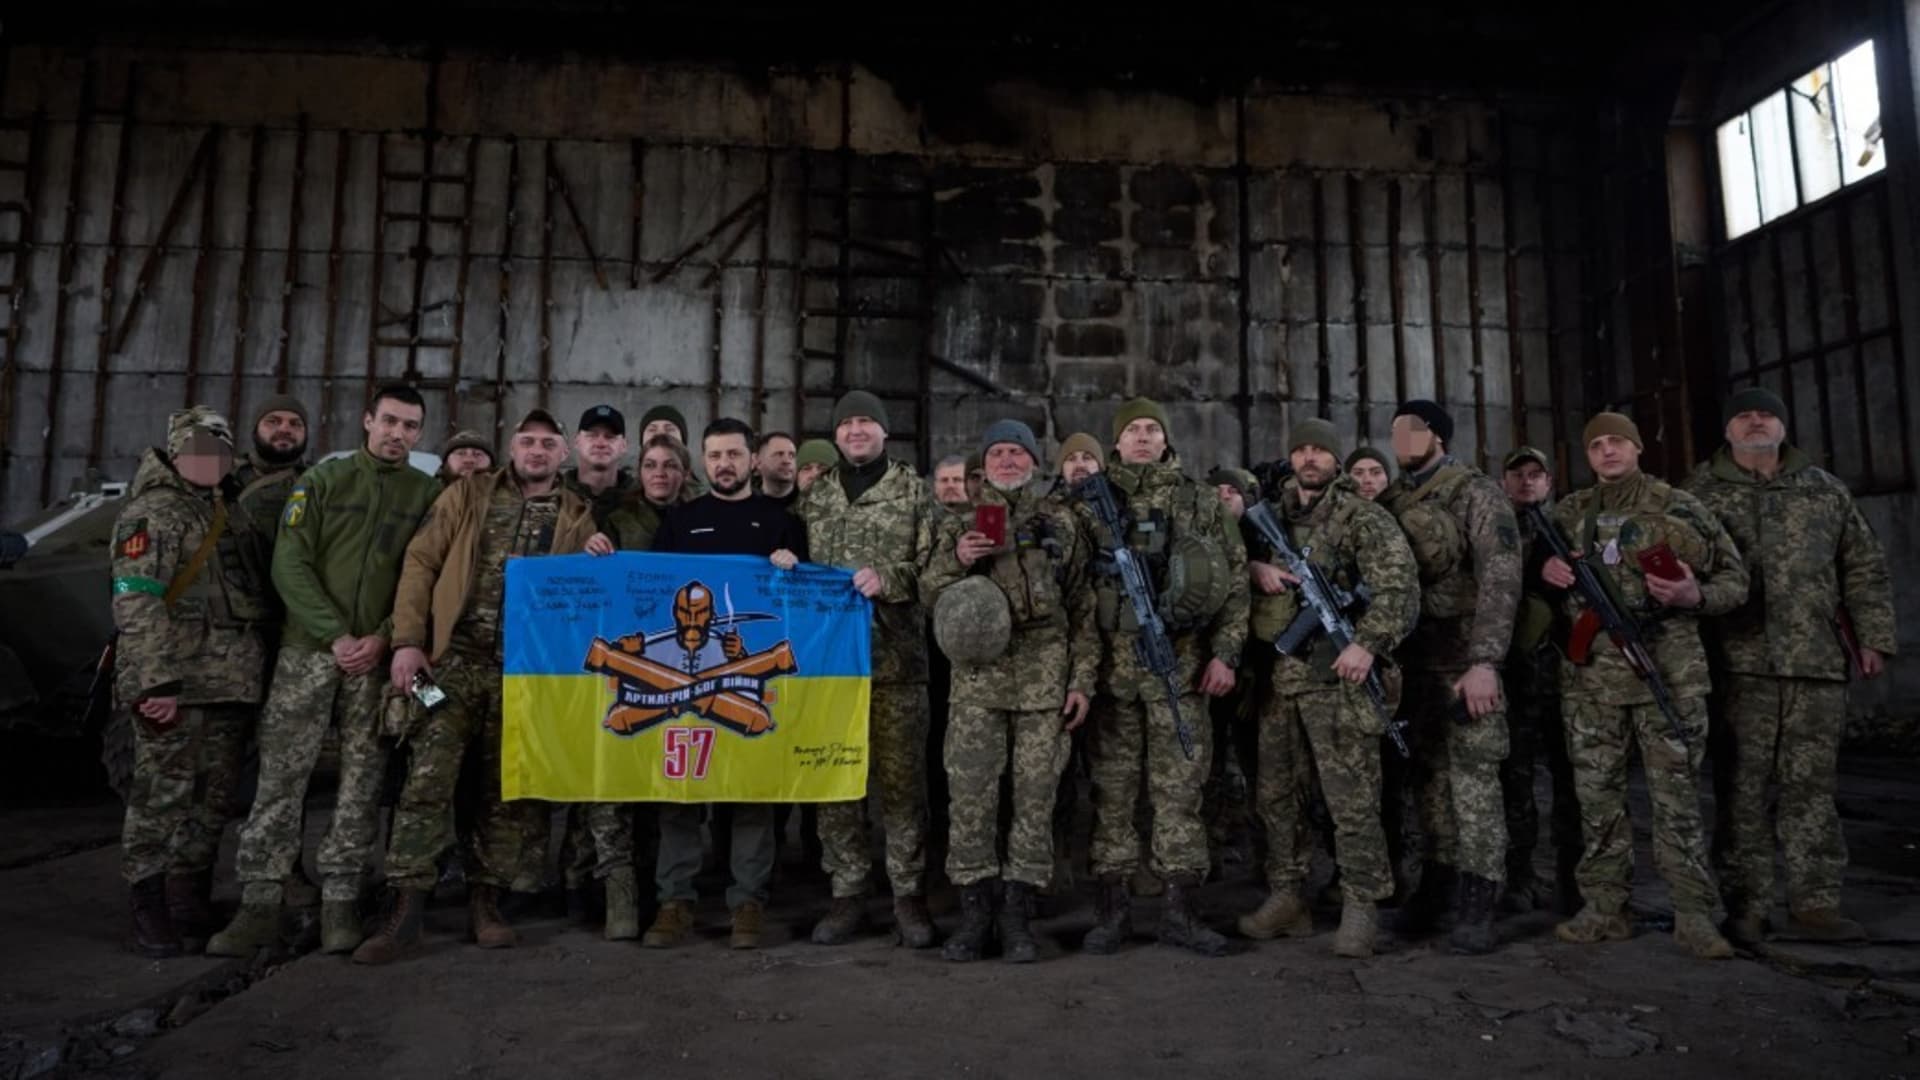 Ukrainian President Volodymyr Zelenskyy (5th L) poses for a photo with Ukrainian soldiers during his visit to Bakhmut frontline amid Russia-Ukraine war in Donetsk region, Bakhmut, Ukraine on March 22, 2023.